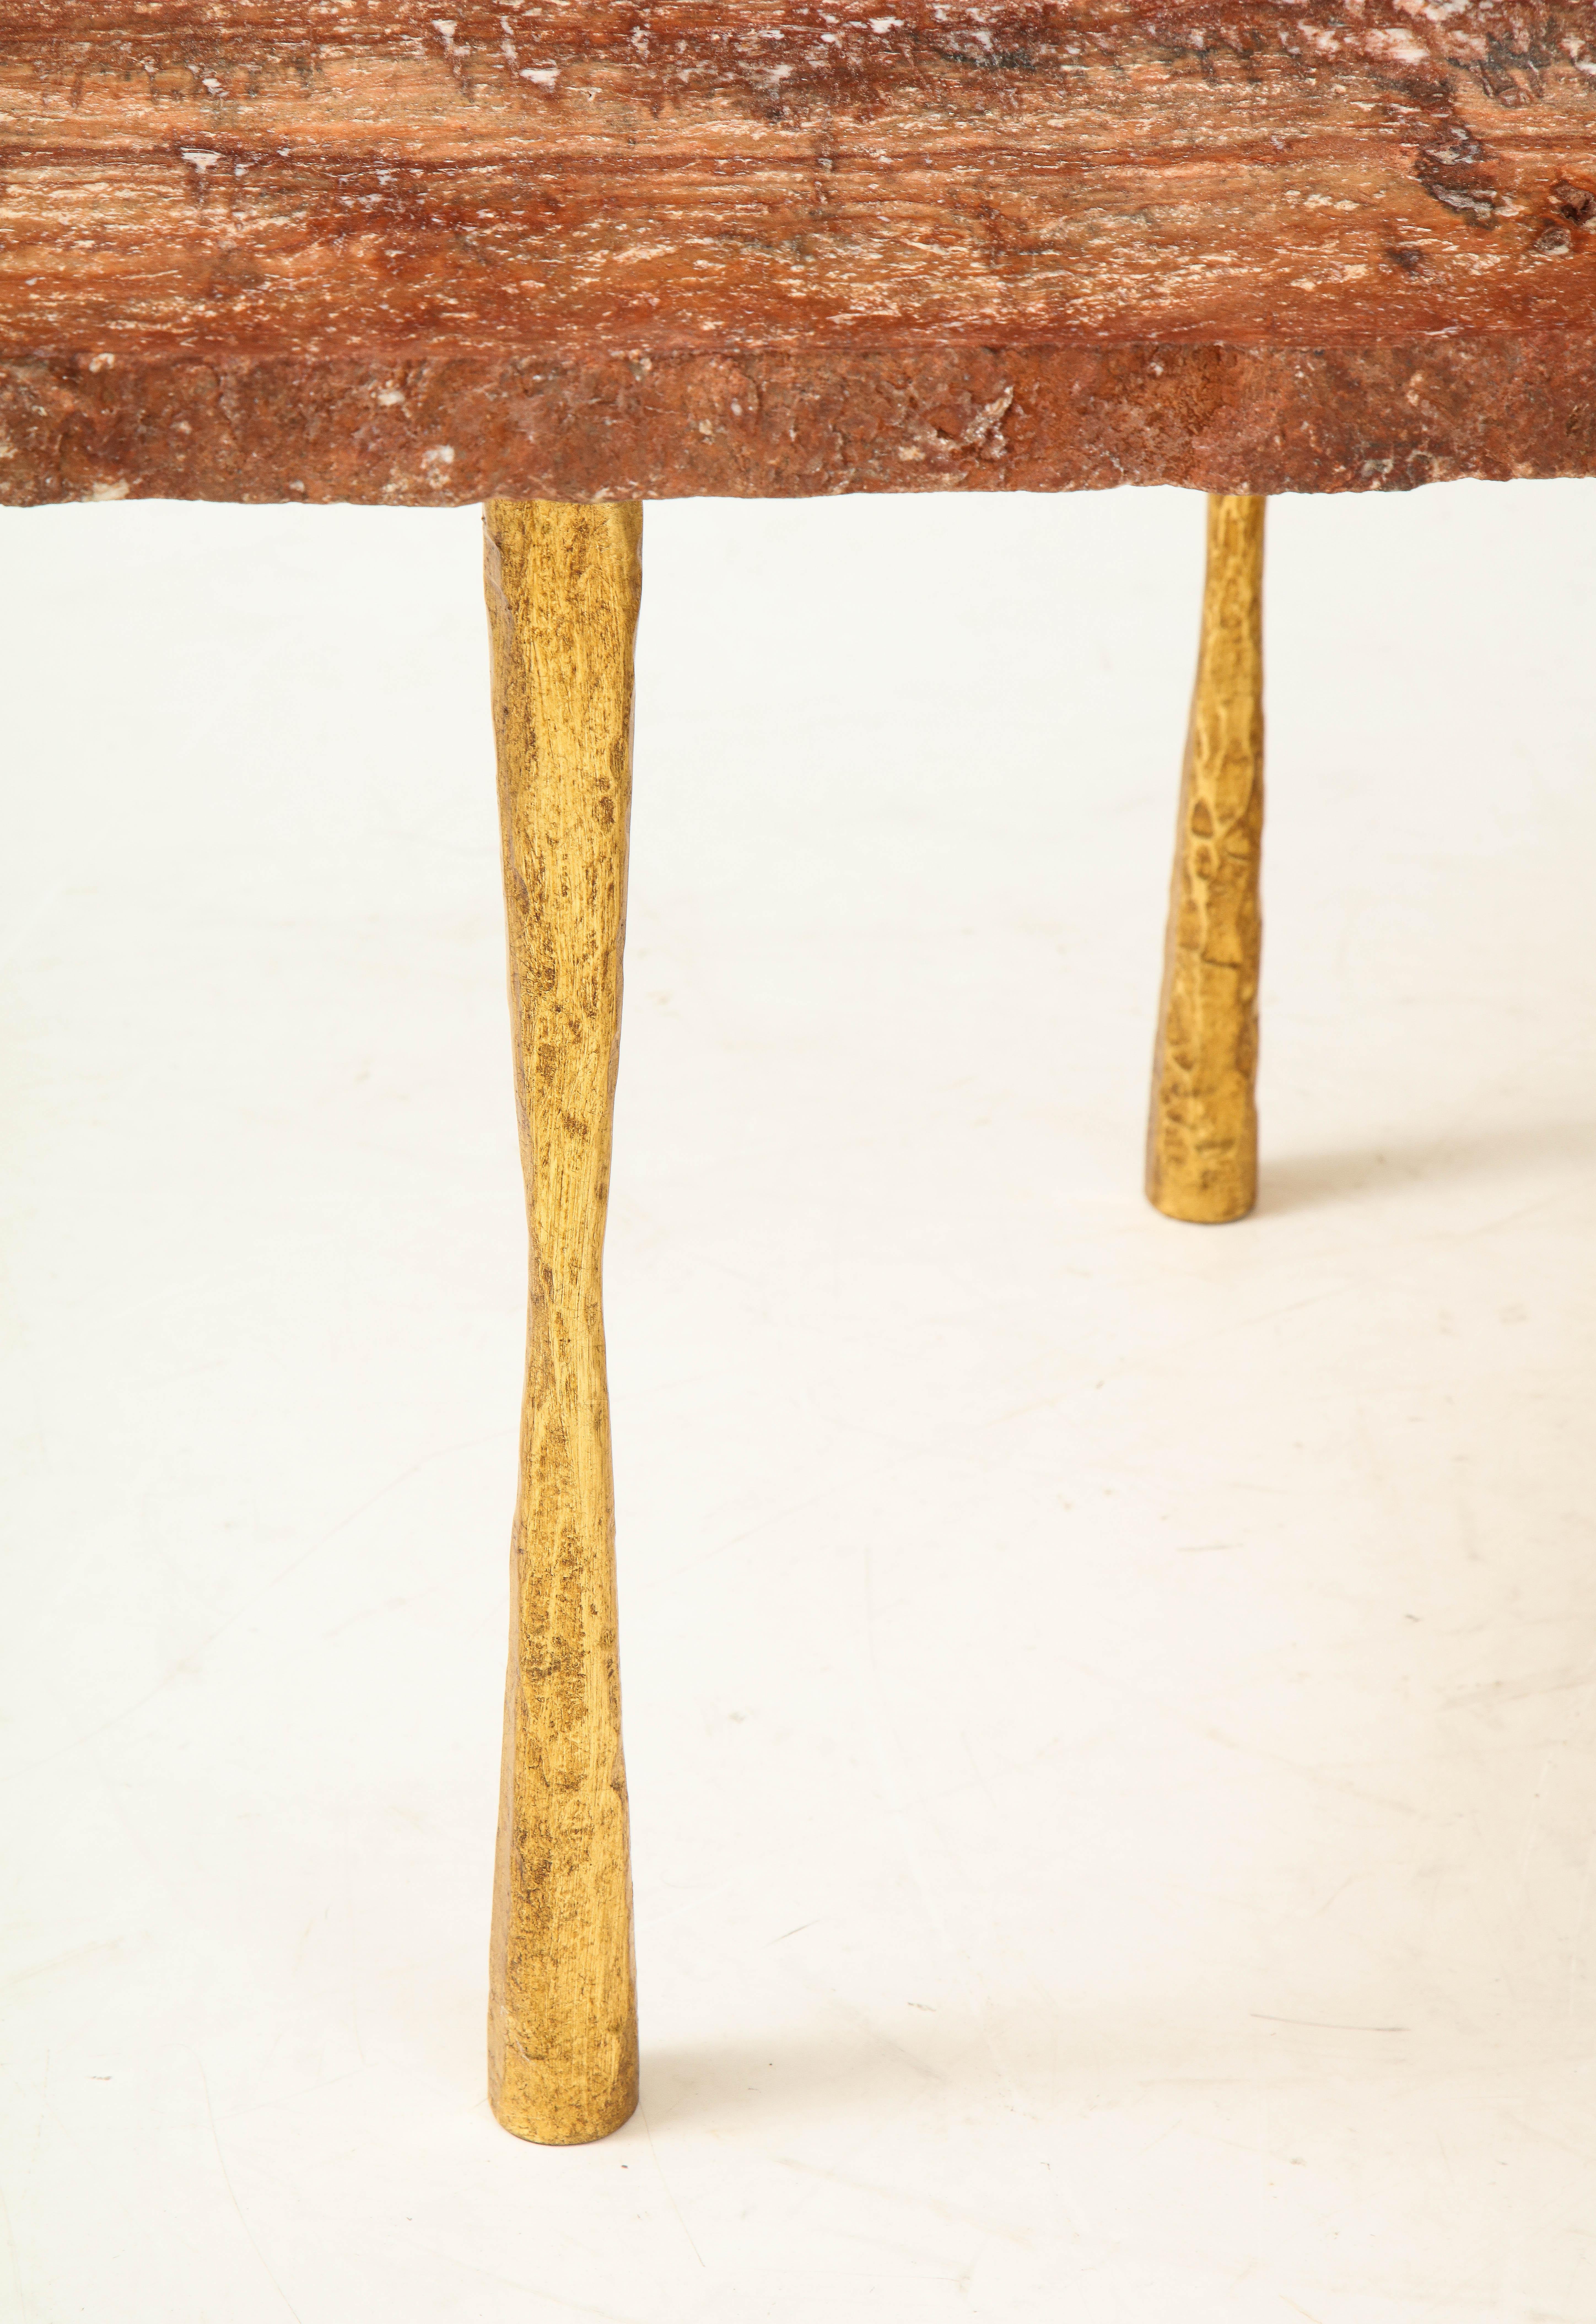 Red Brown Travertine Natural Edge Slab Stone and Gold Leaf Cocktail Table, Italy In New Condition For Sale In New York, NY